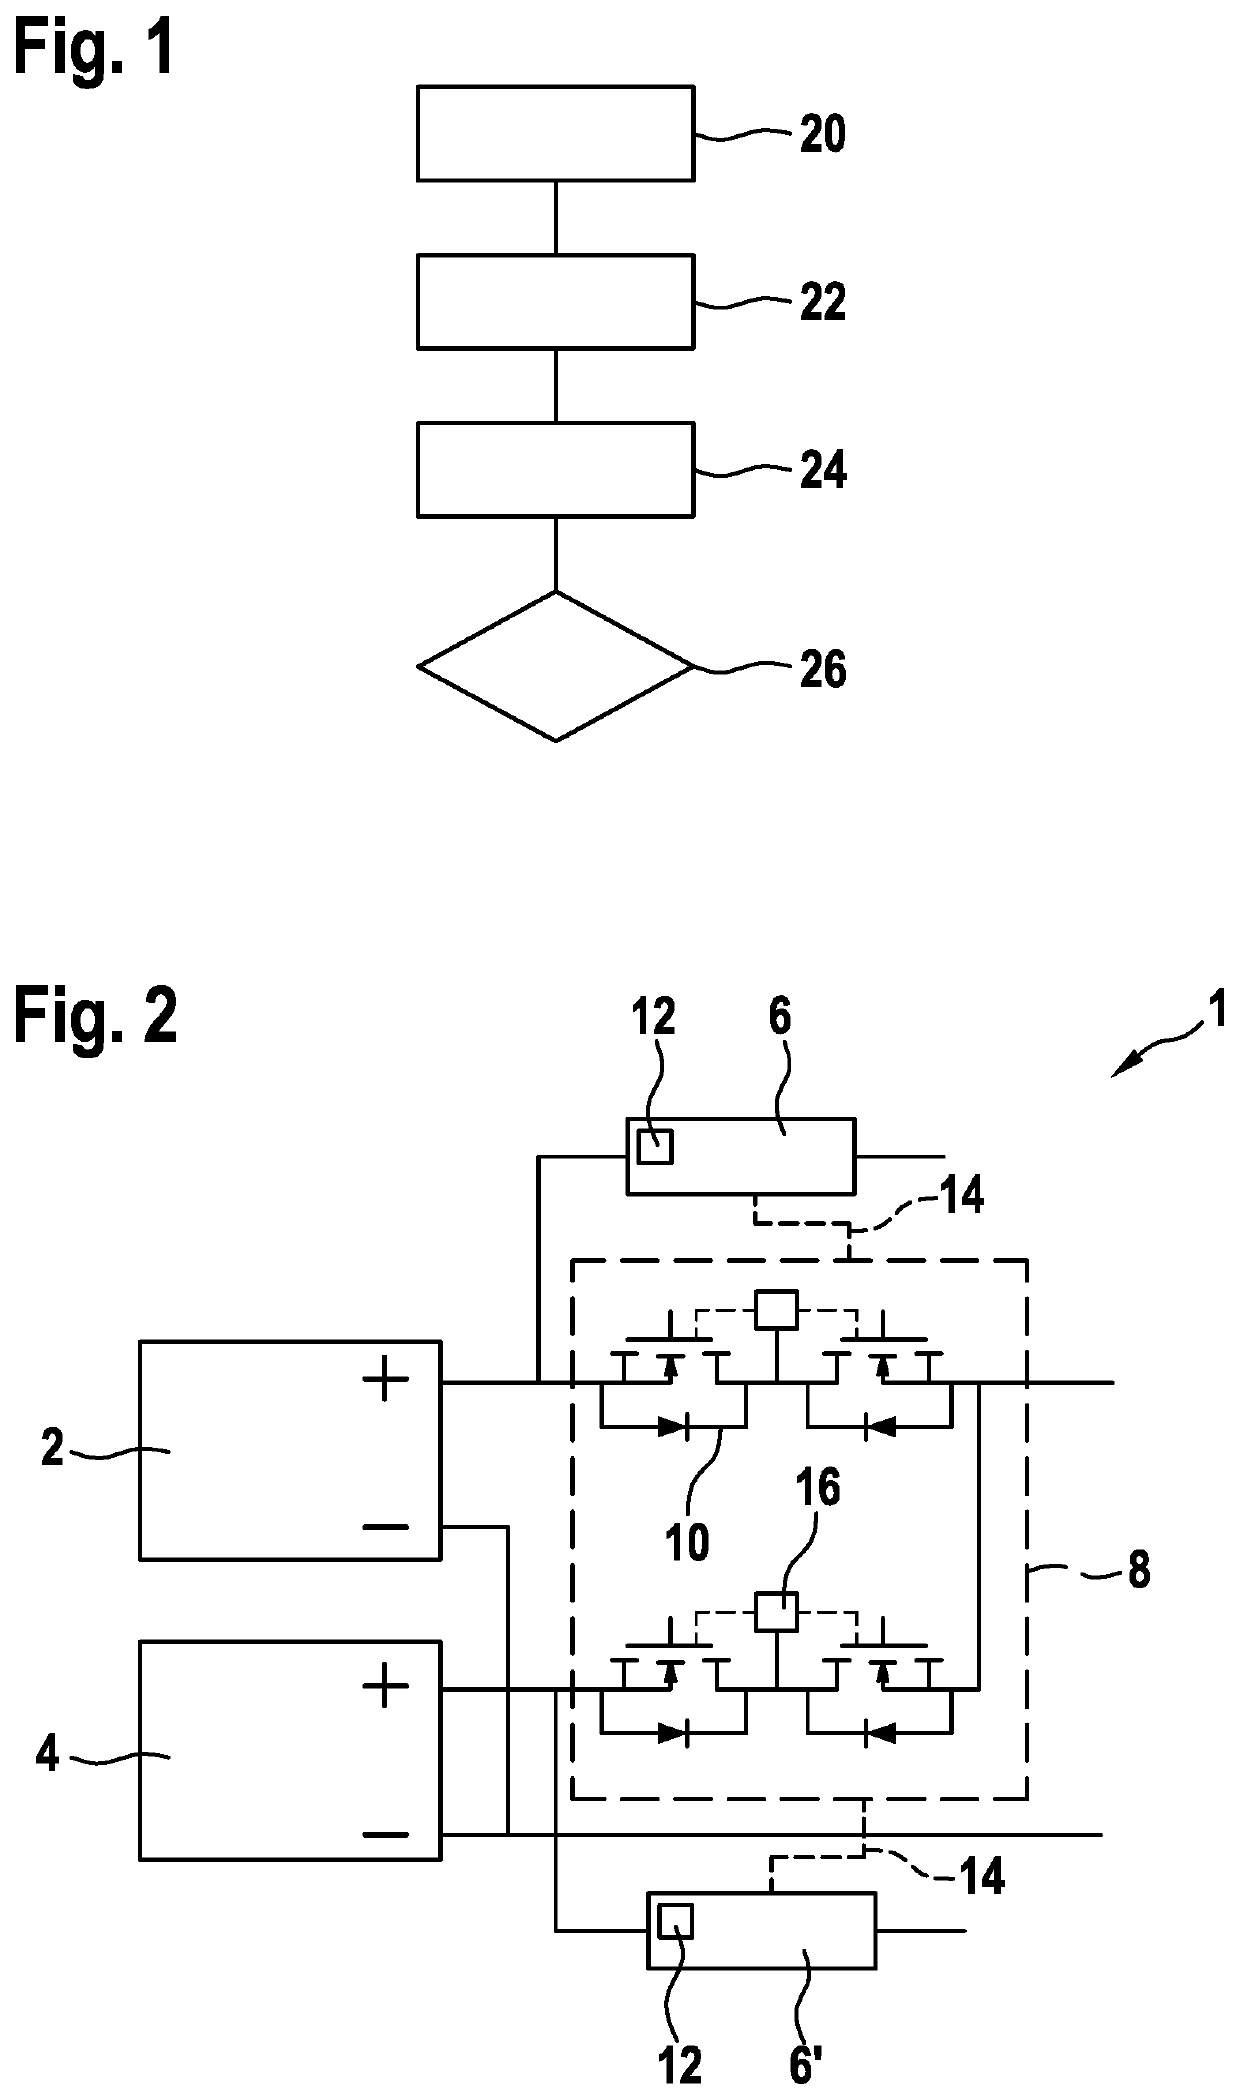 Method and system for operating electrical energy stores